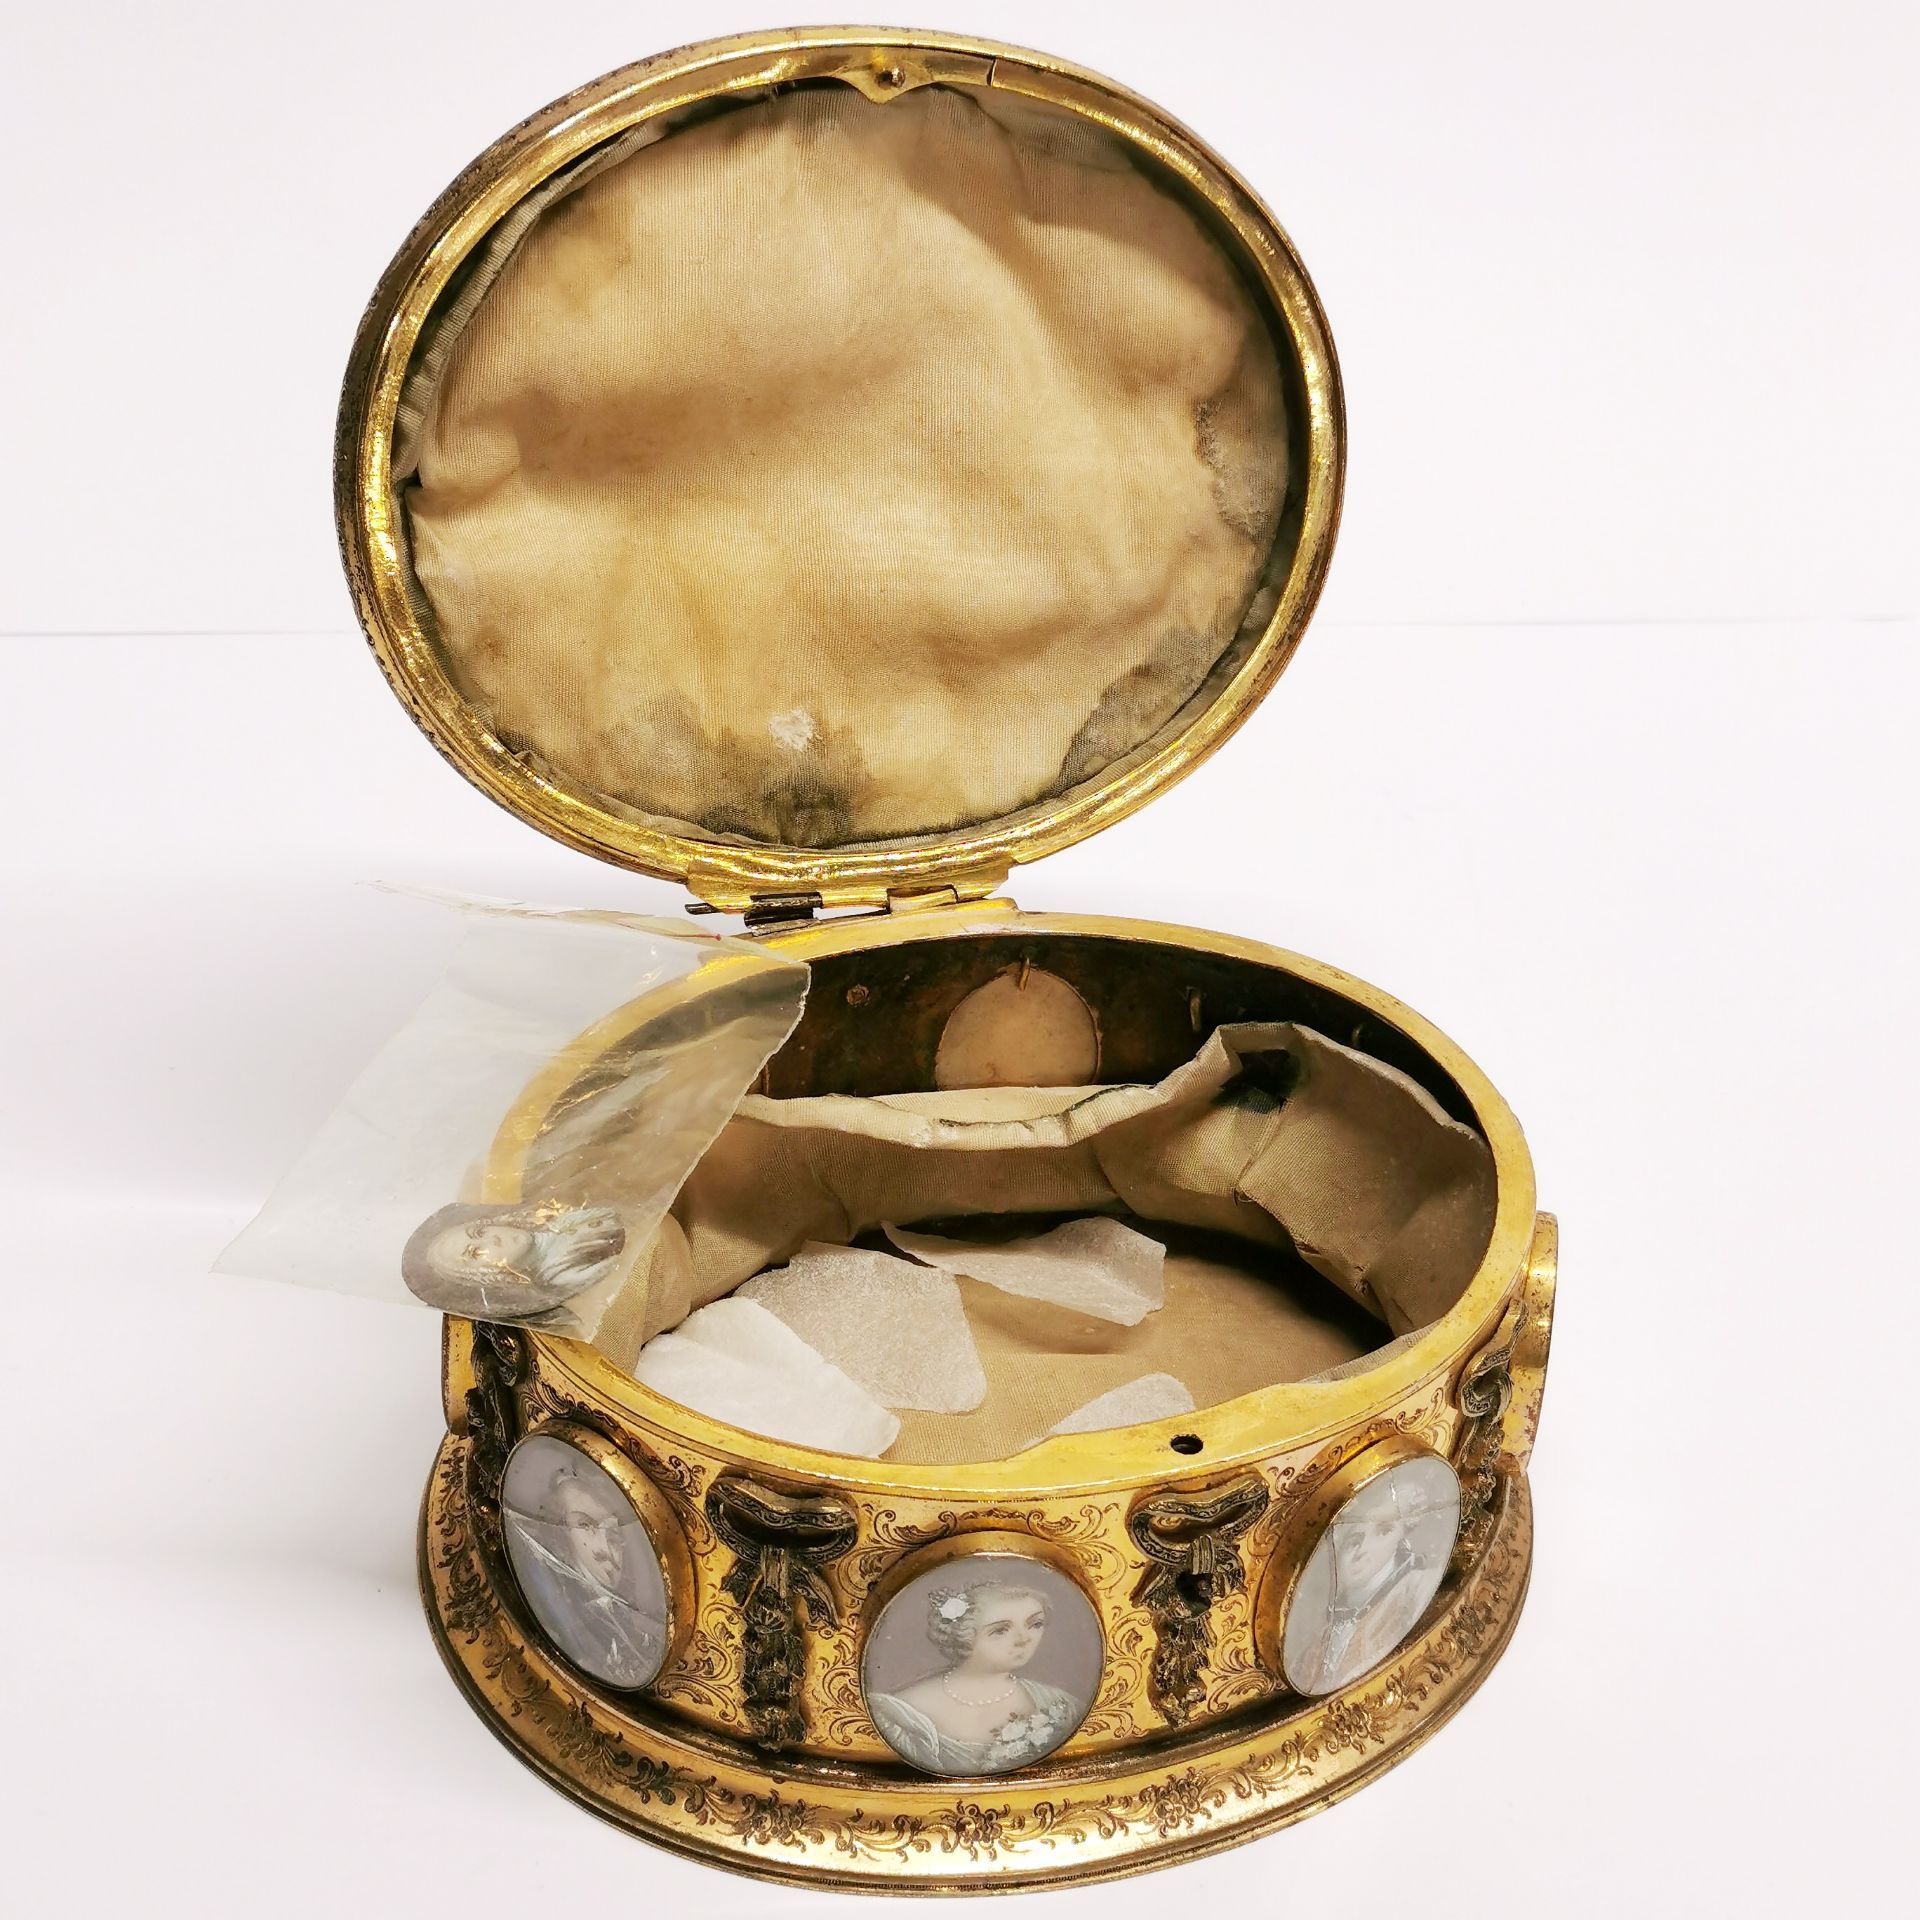 A superb 18thC French gilt casket embellished with hand painted portrait miniatures of courtiers, - Image 3 of 5